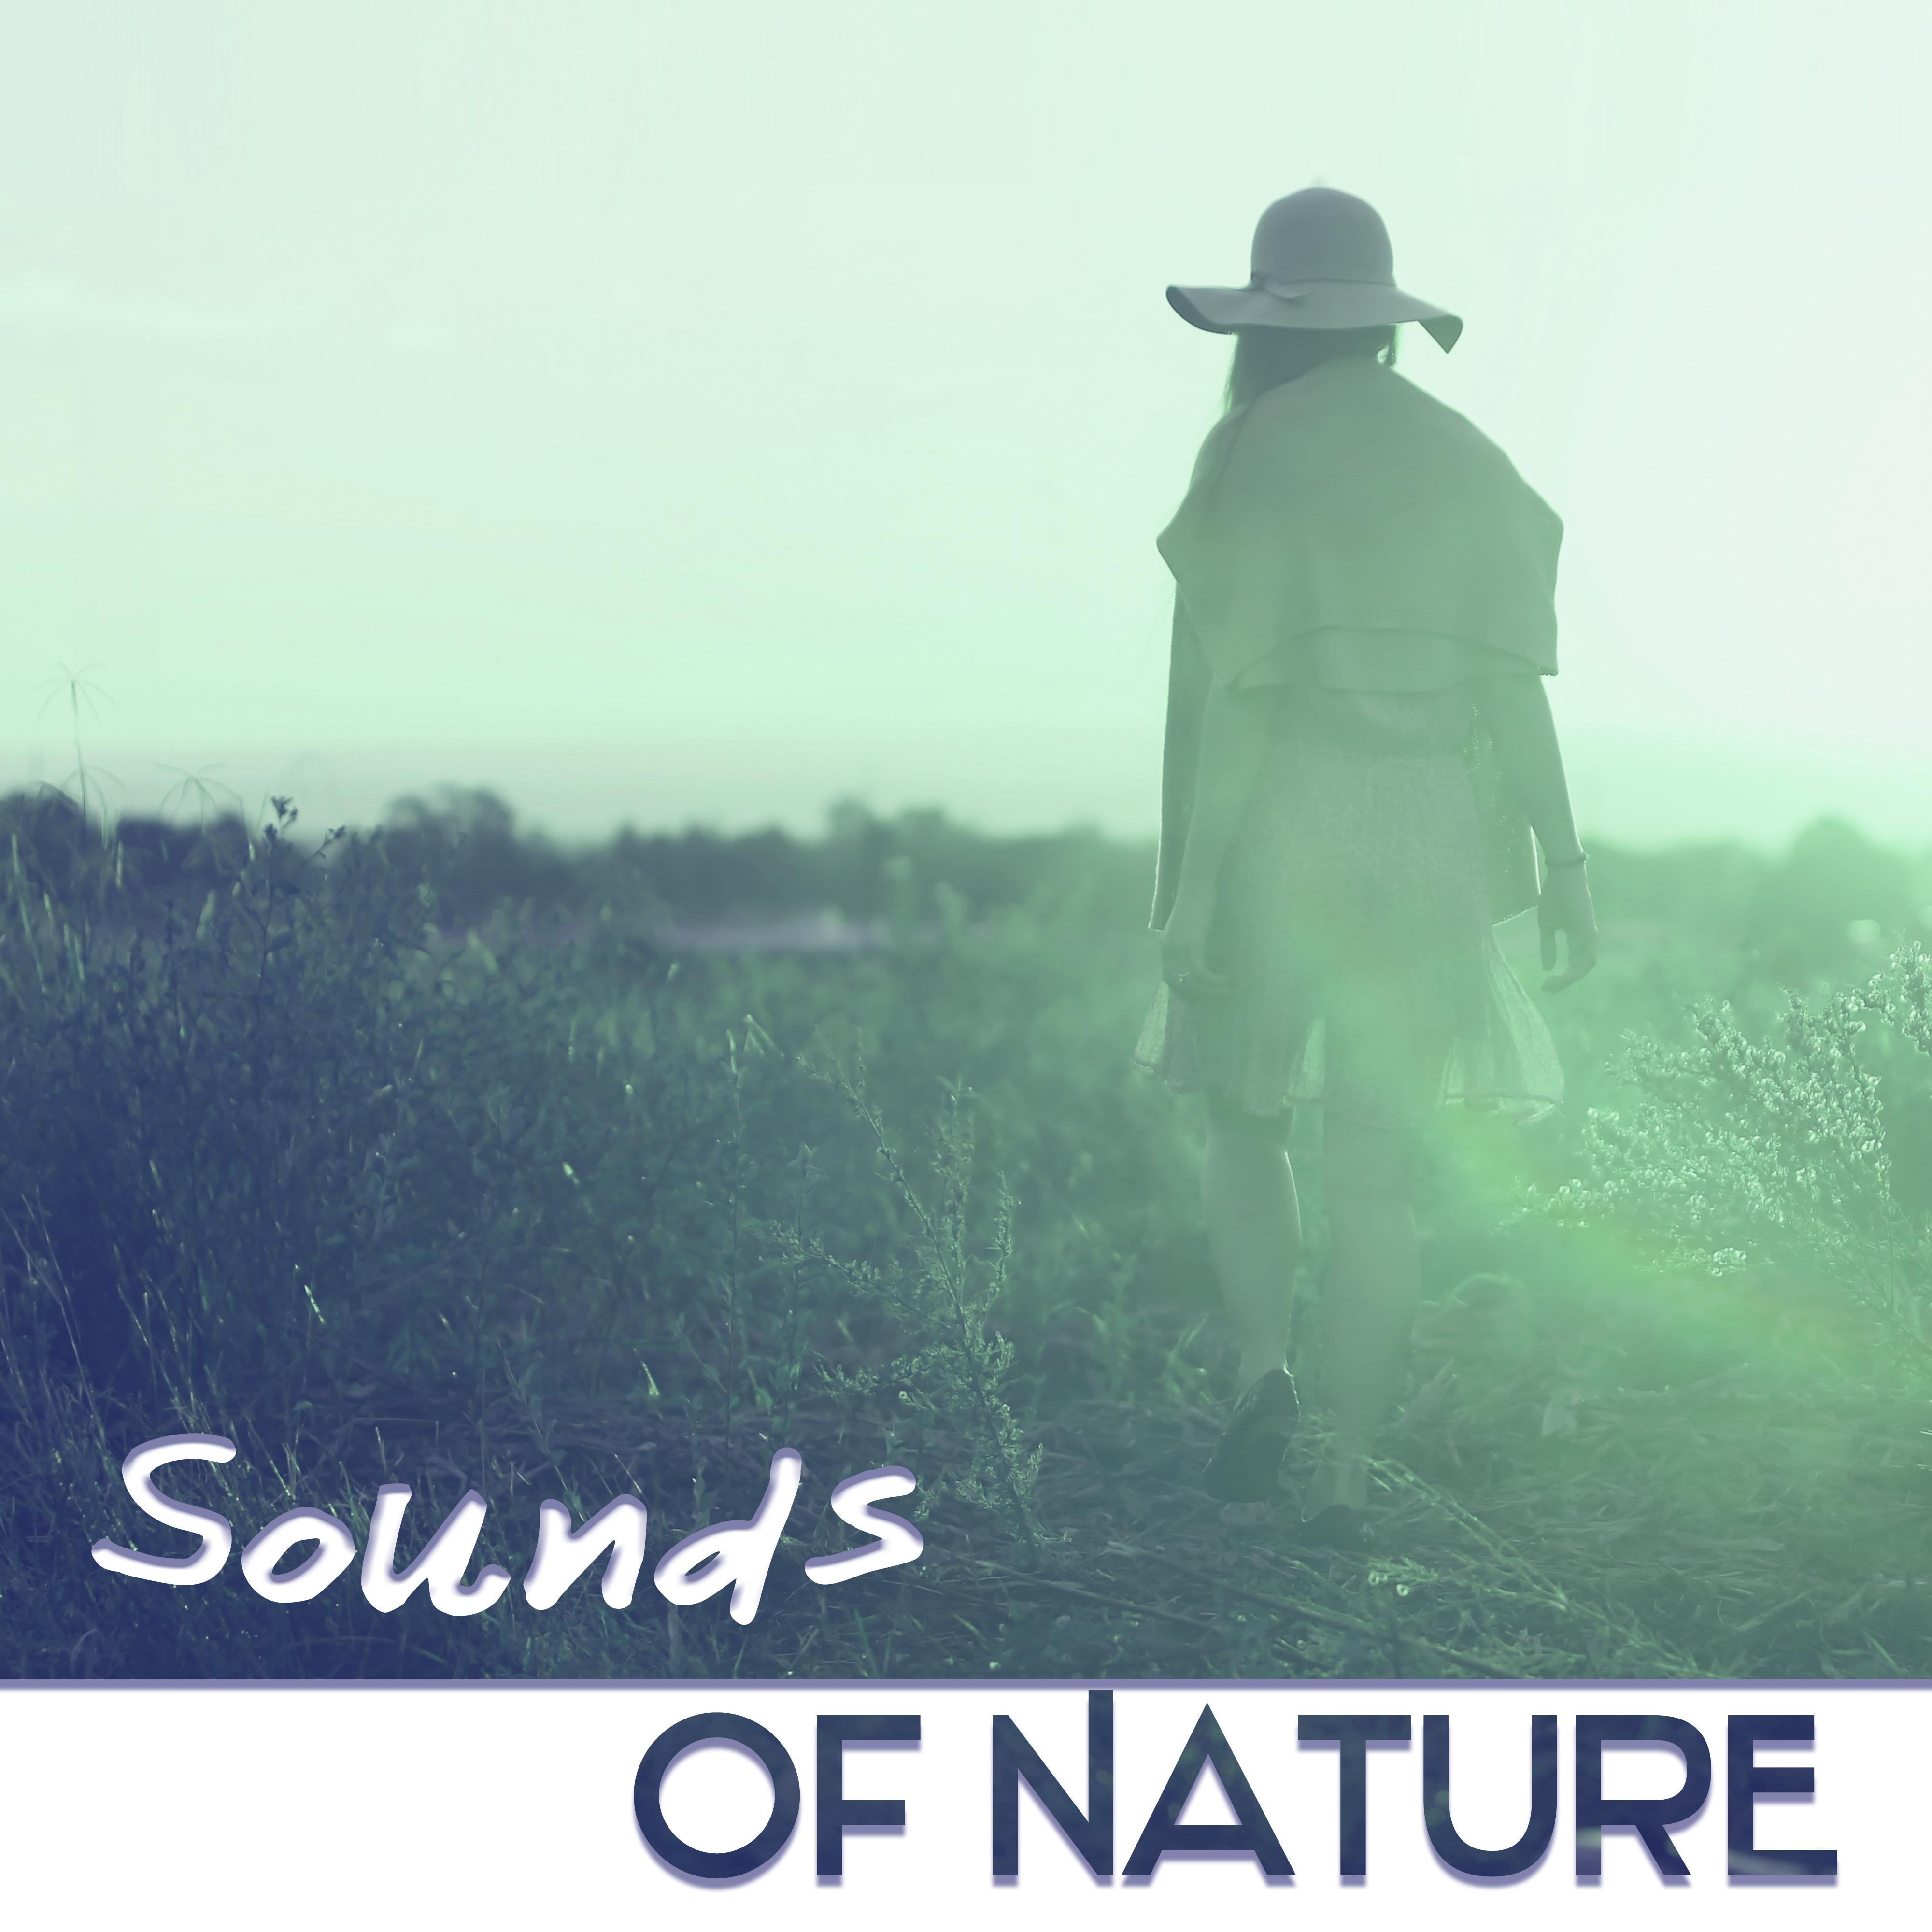 Sounds Of Nature  Music for Relaxation  Meditation, Sleep Song, Lucid Dream, Binaural Beats with Delta Waves